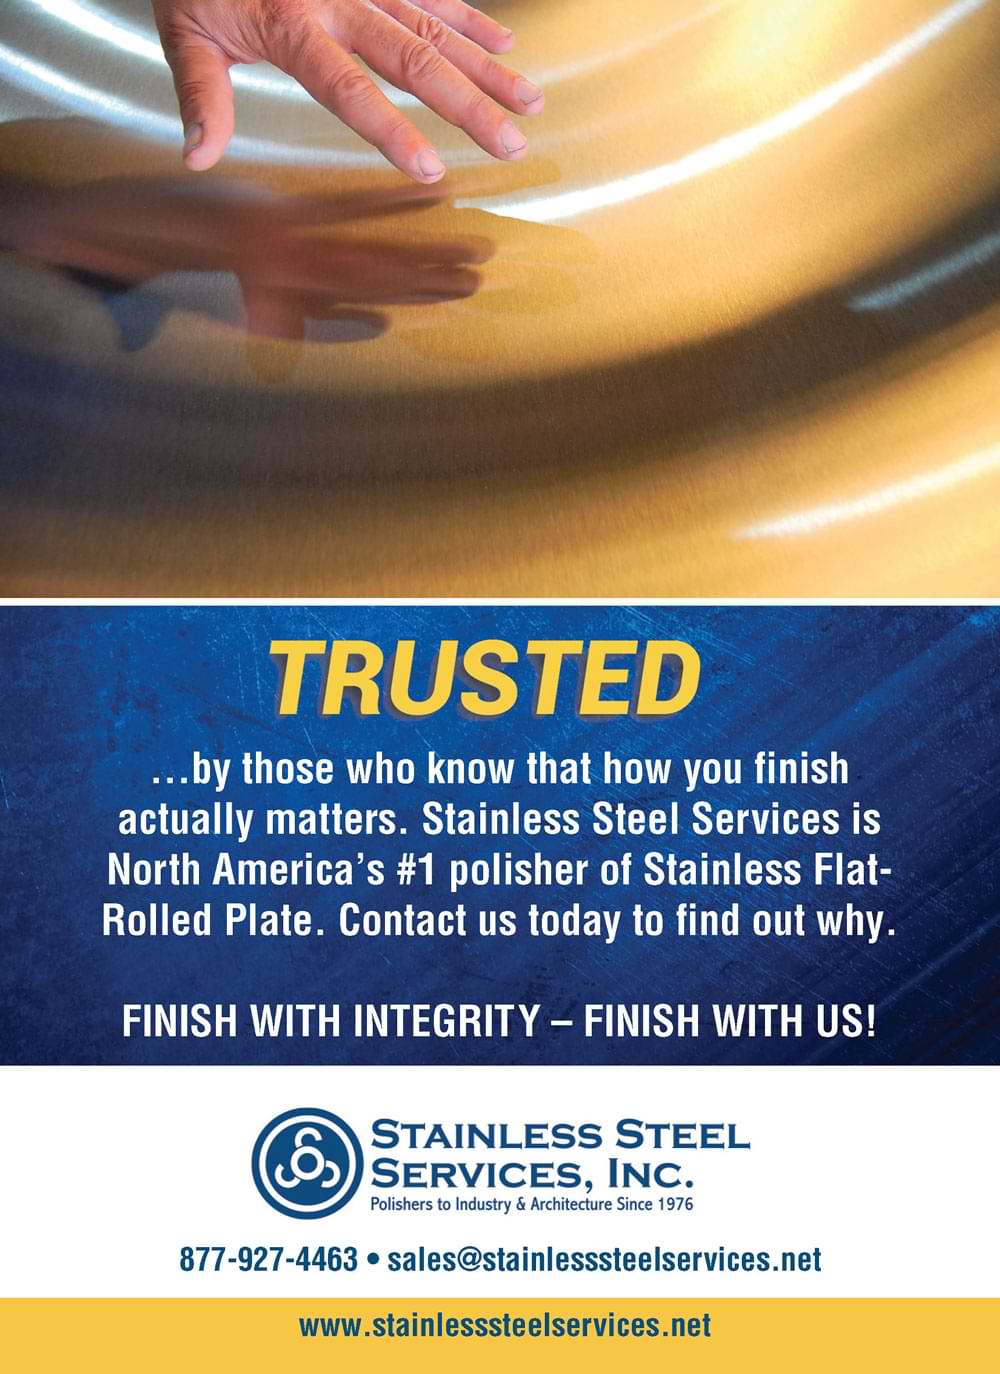 Stainless Steel Services Advertisement